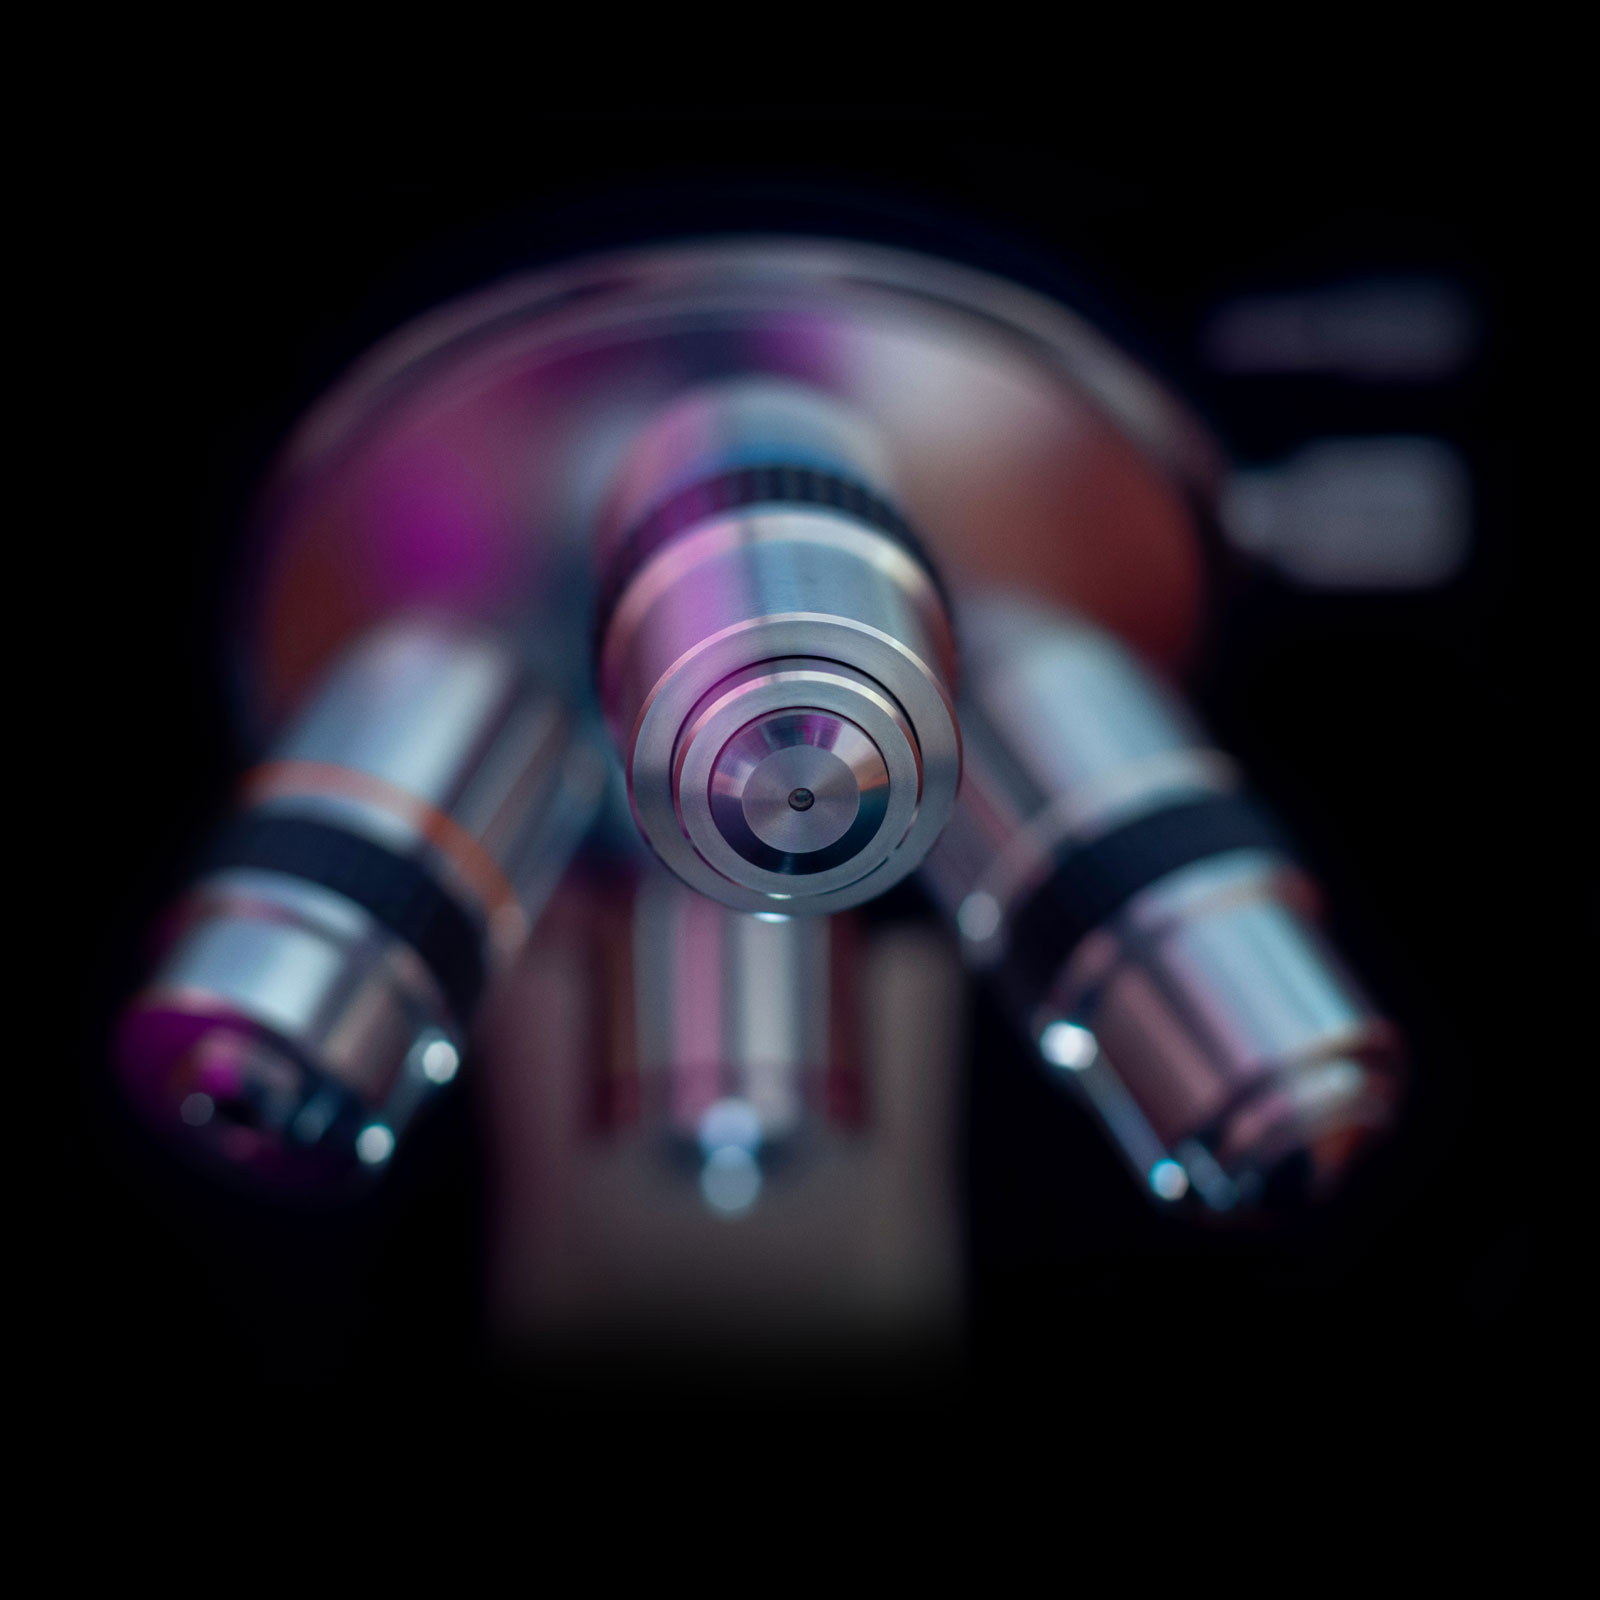 Close up of a microscope turret objective